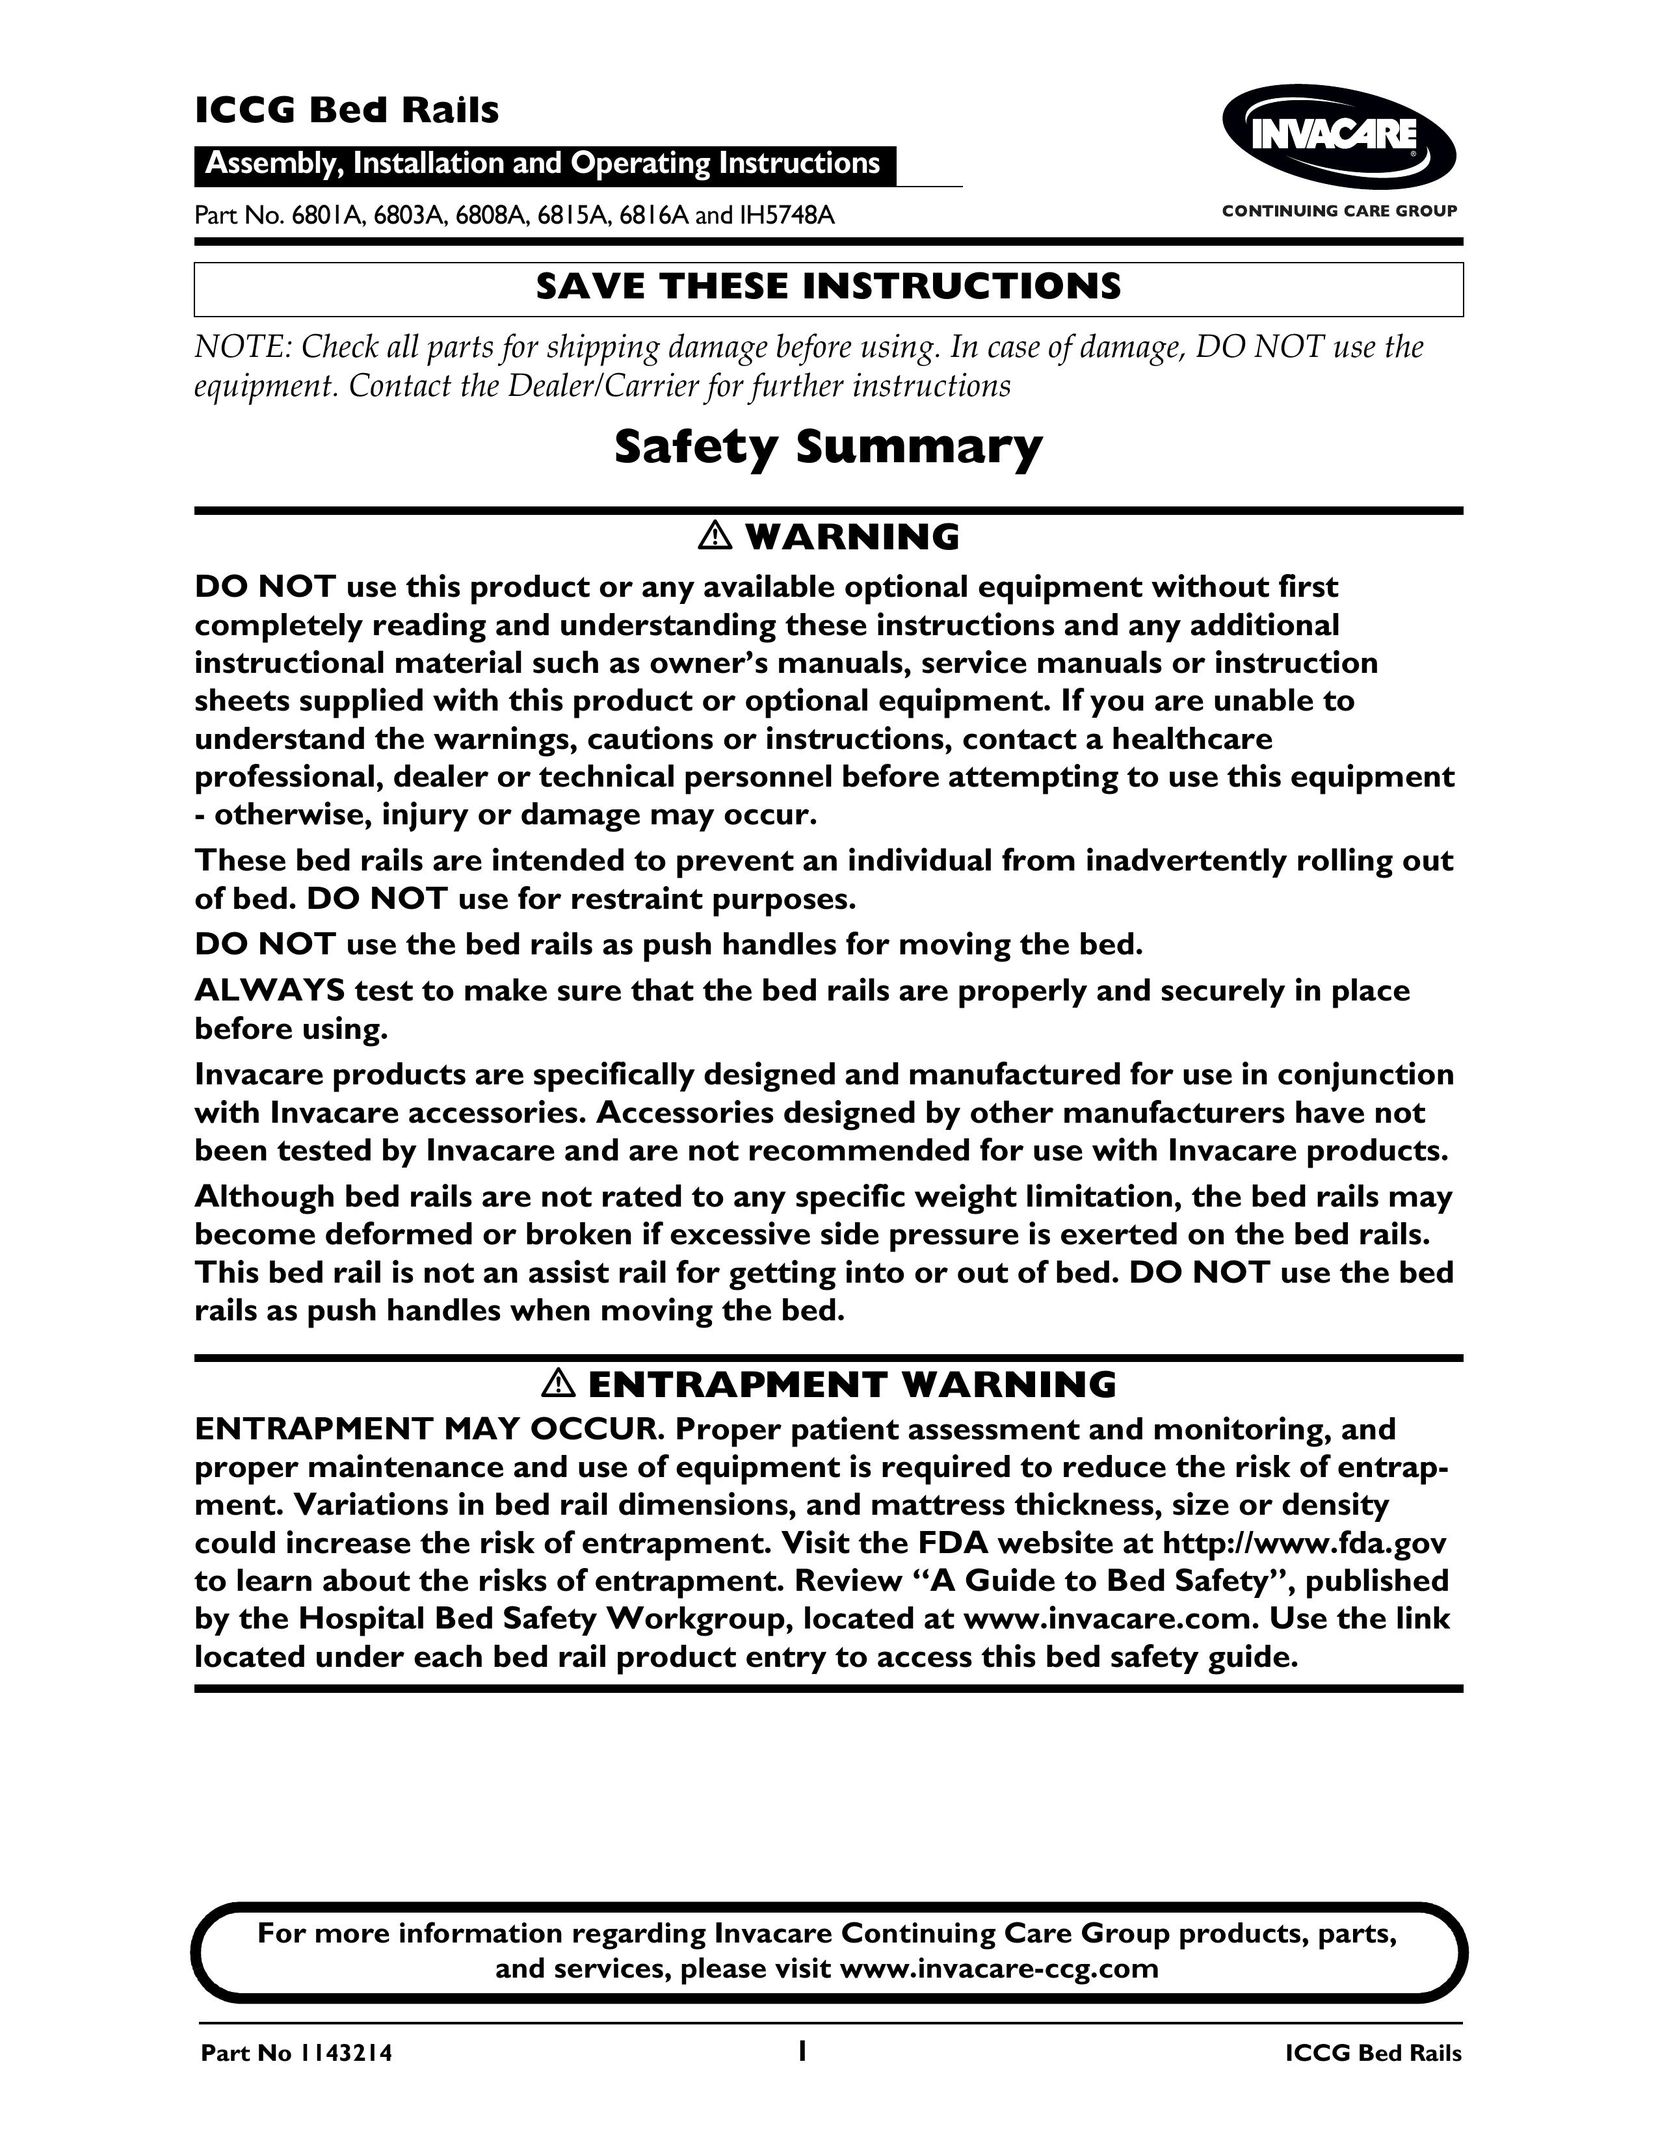 Invacare 6808A Camping Equipment User Manual